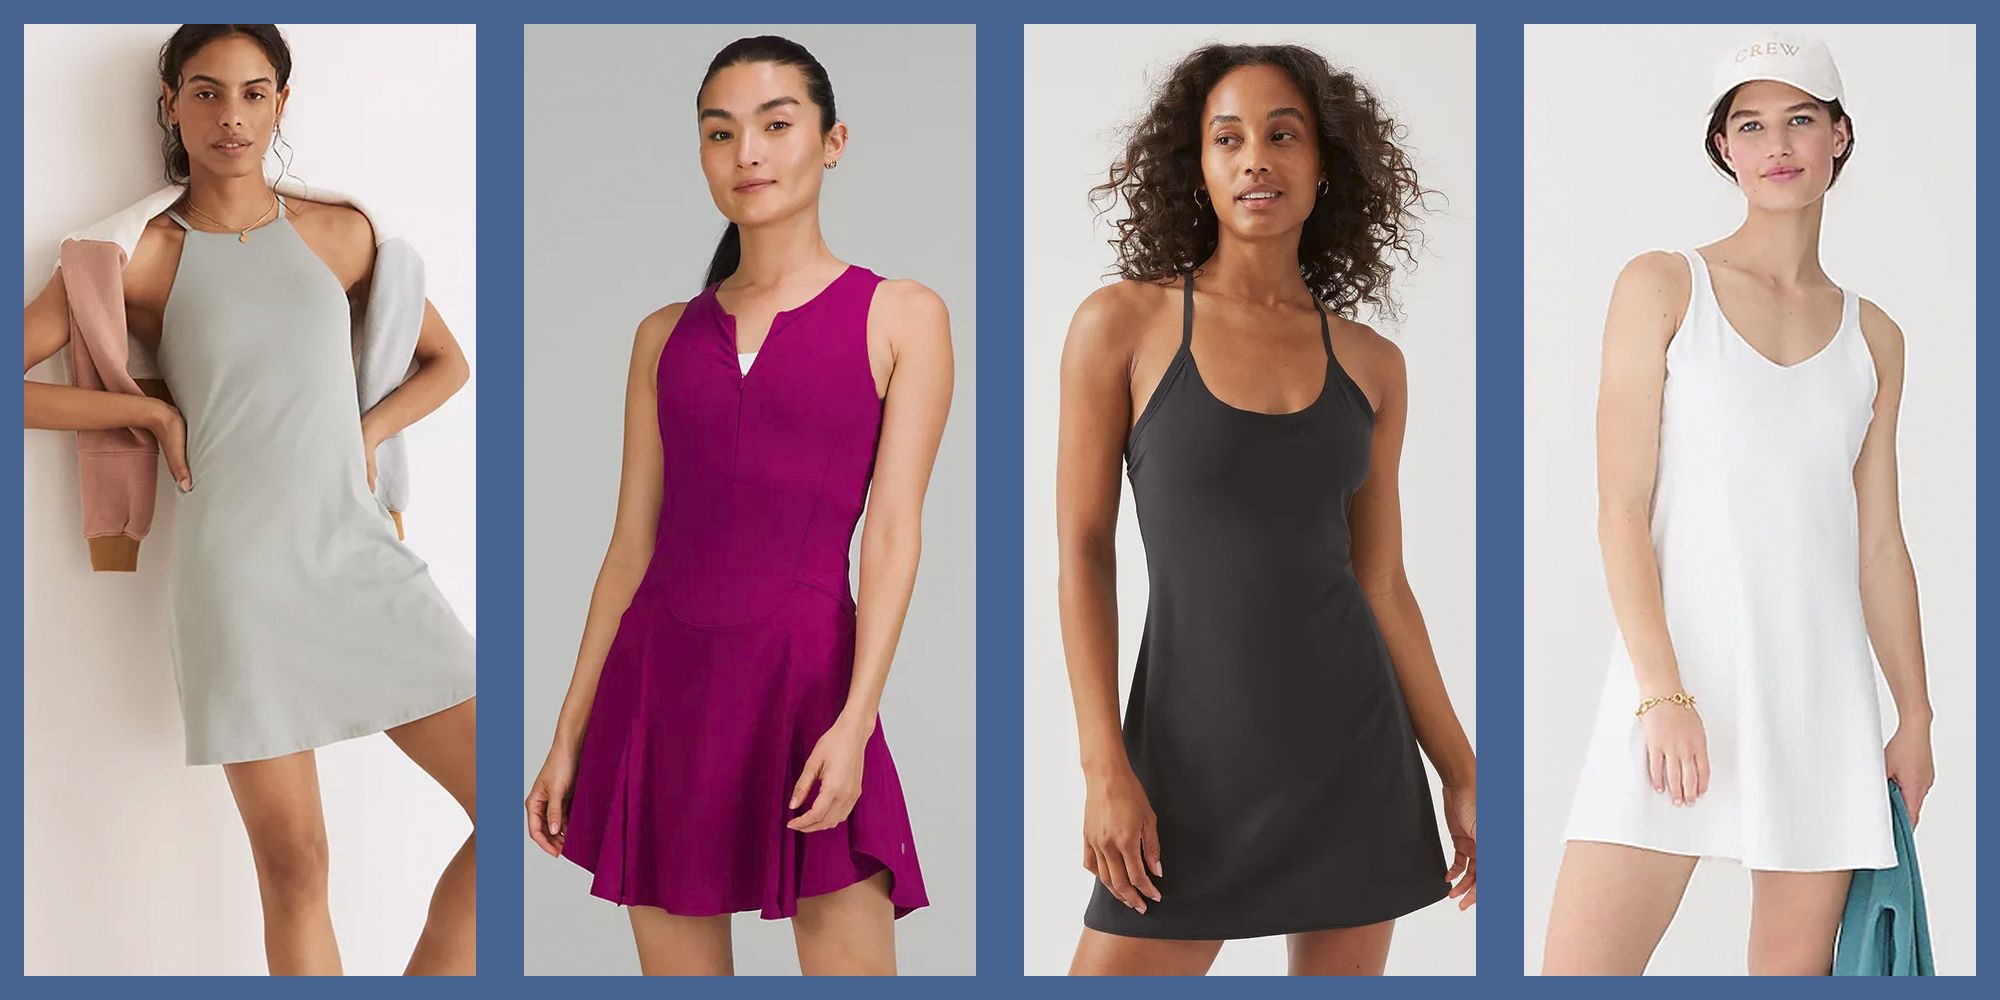 The exercise dress: What to know about the trend and where to find